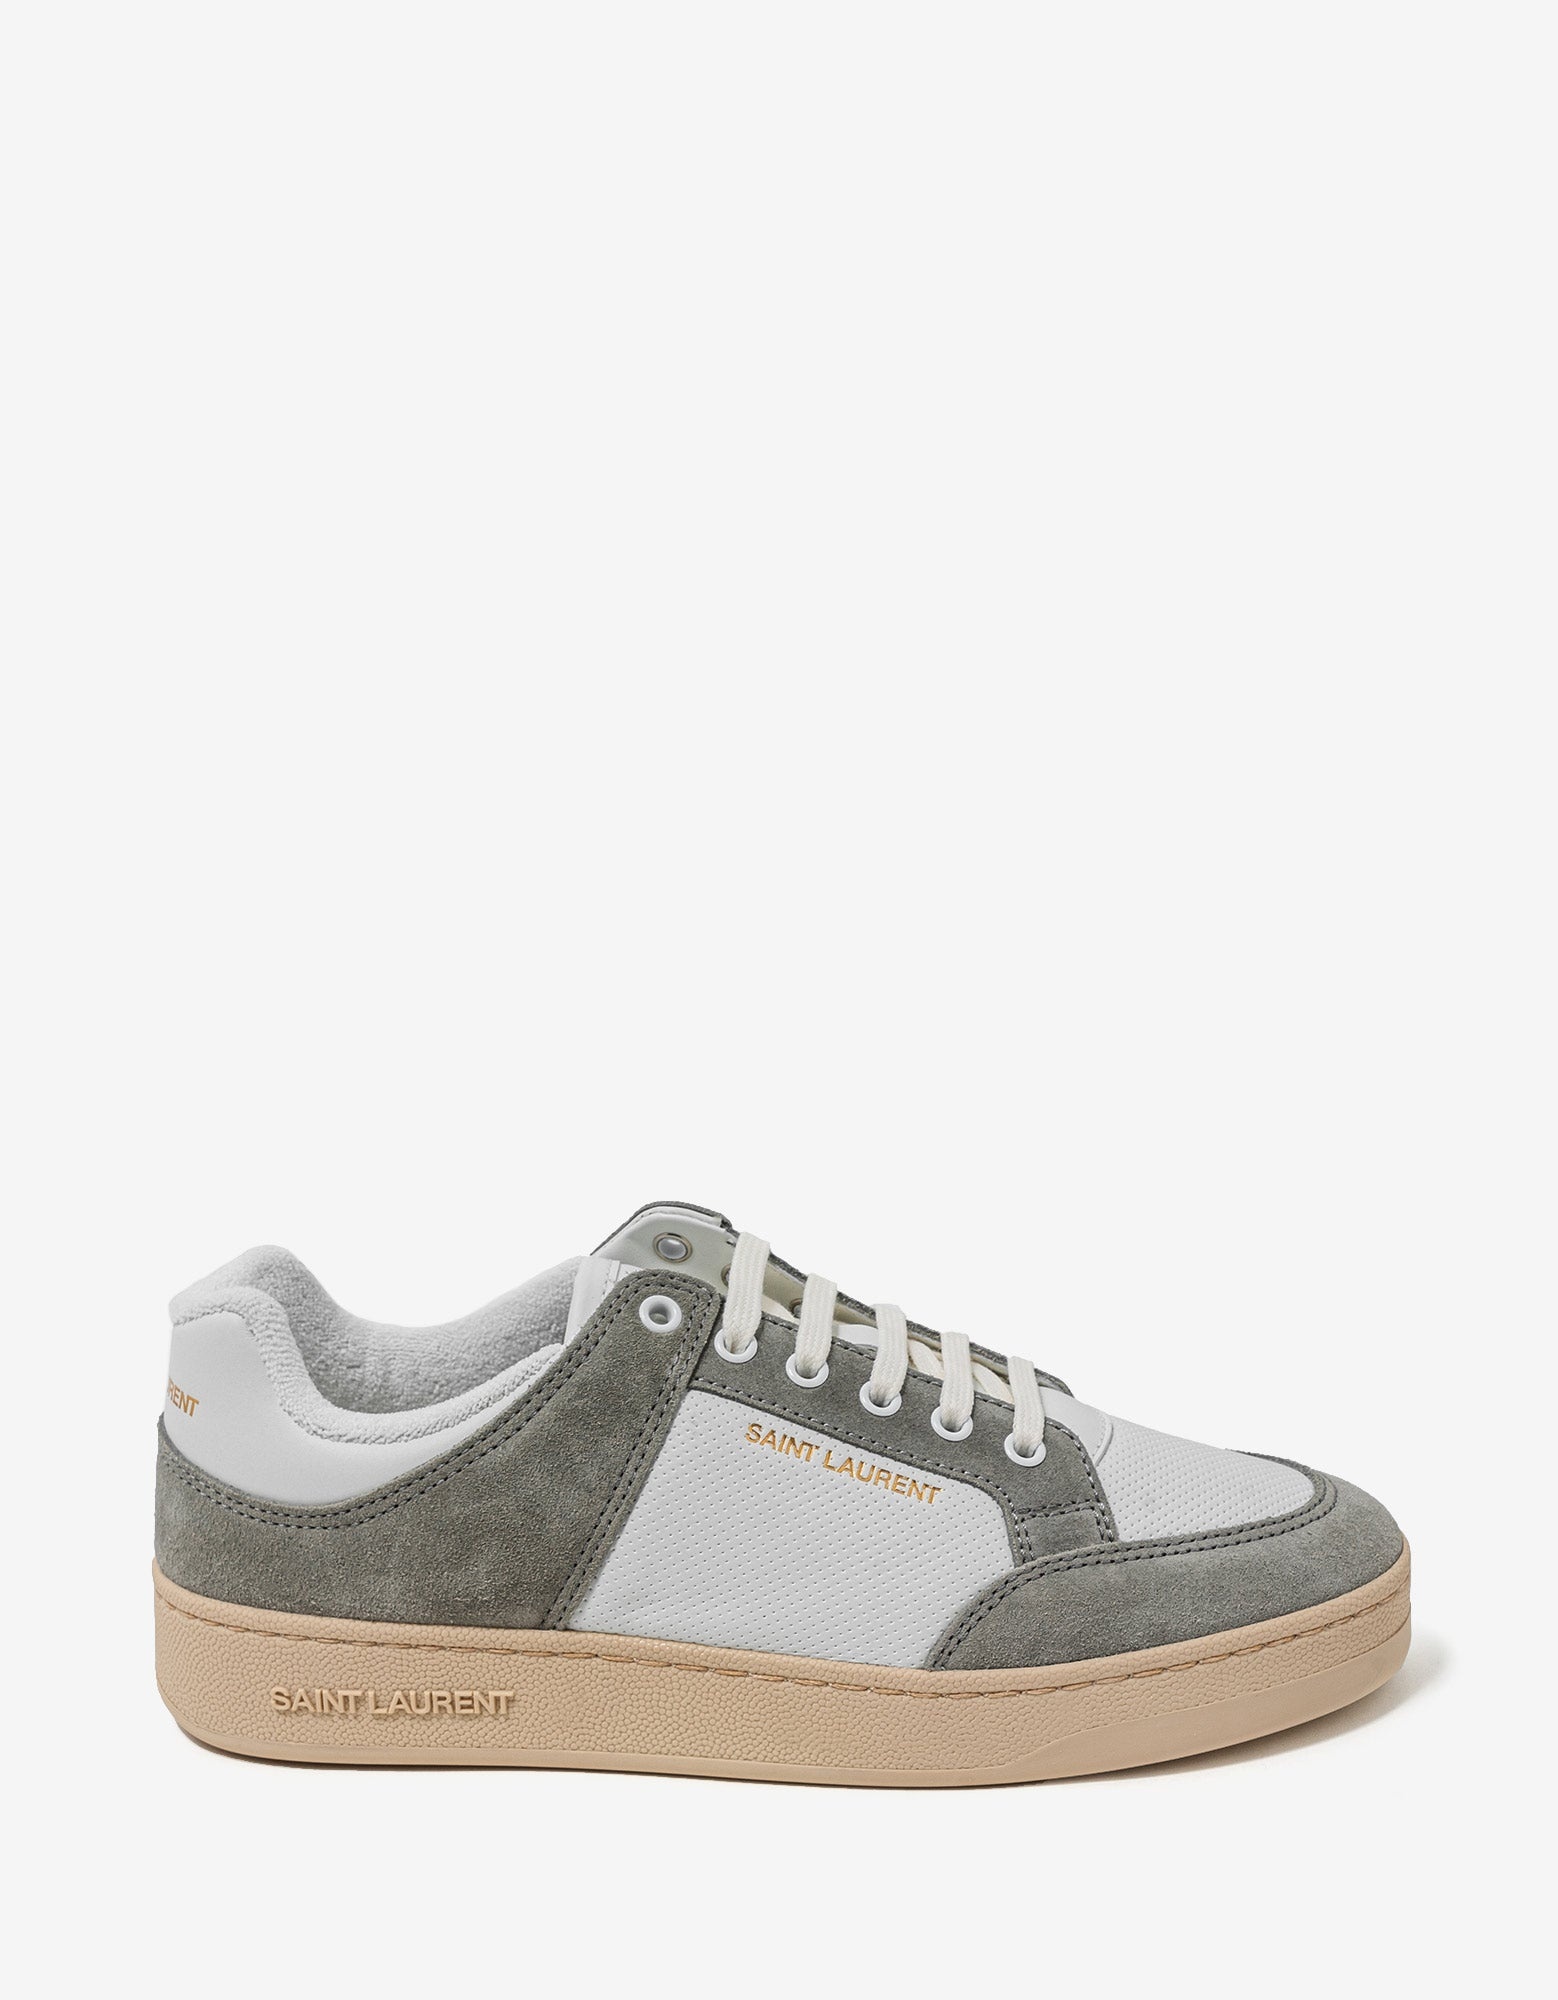 White & Grey SL/61 Leather Trainers - 2